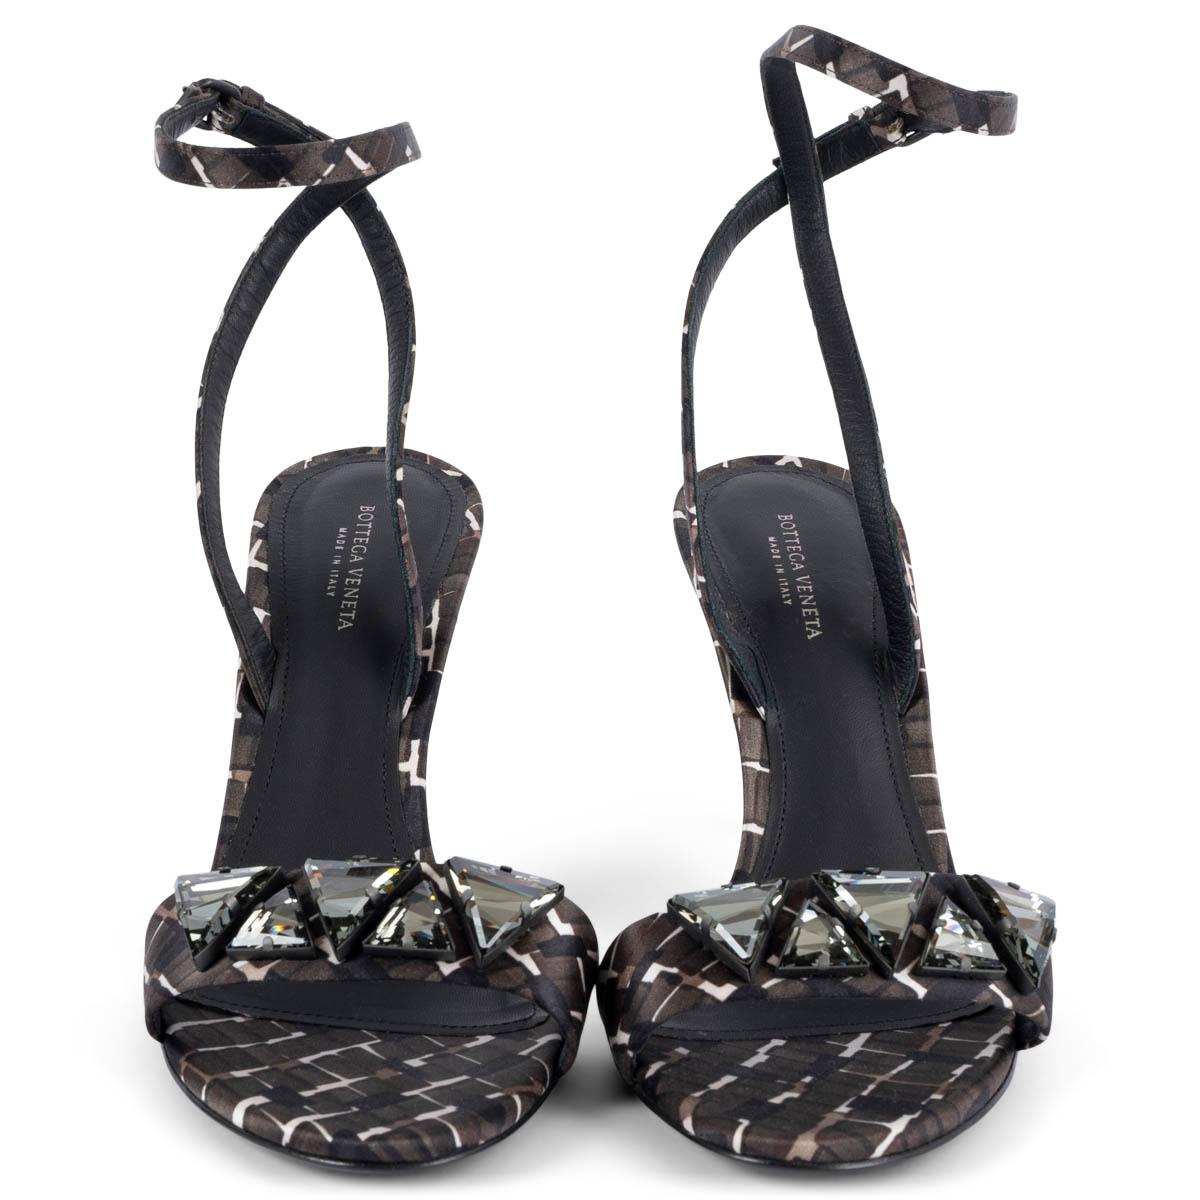 100% authentic Bottega Veneta ankle-strap sandals in espresso brown, black and white silk satin embellished with triangular crystals. Have been worn once inside and are in virtually new condition. Come with dust bag.

Measurements
Imprinted